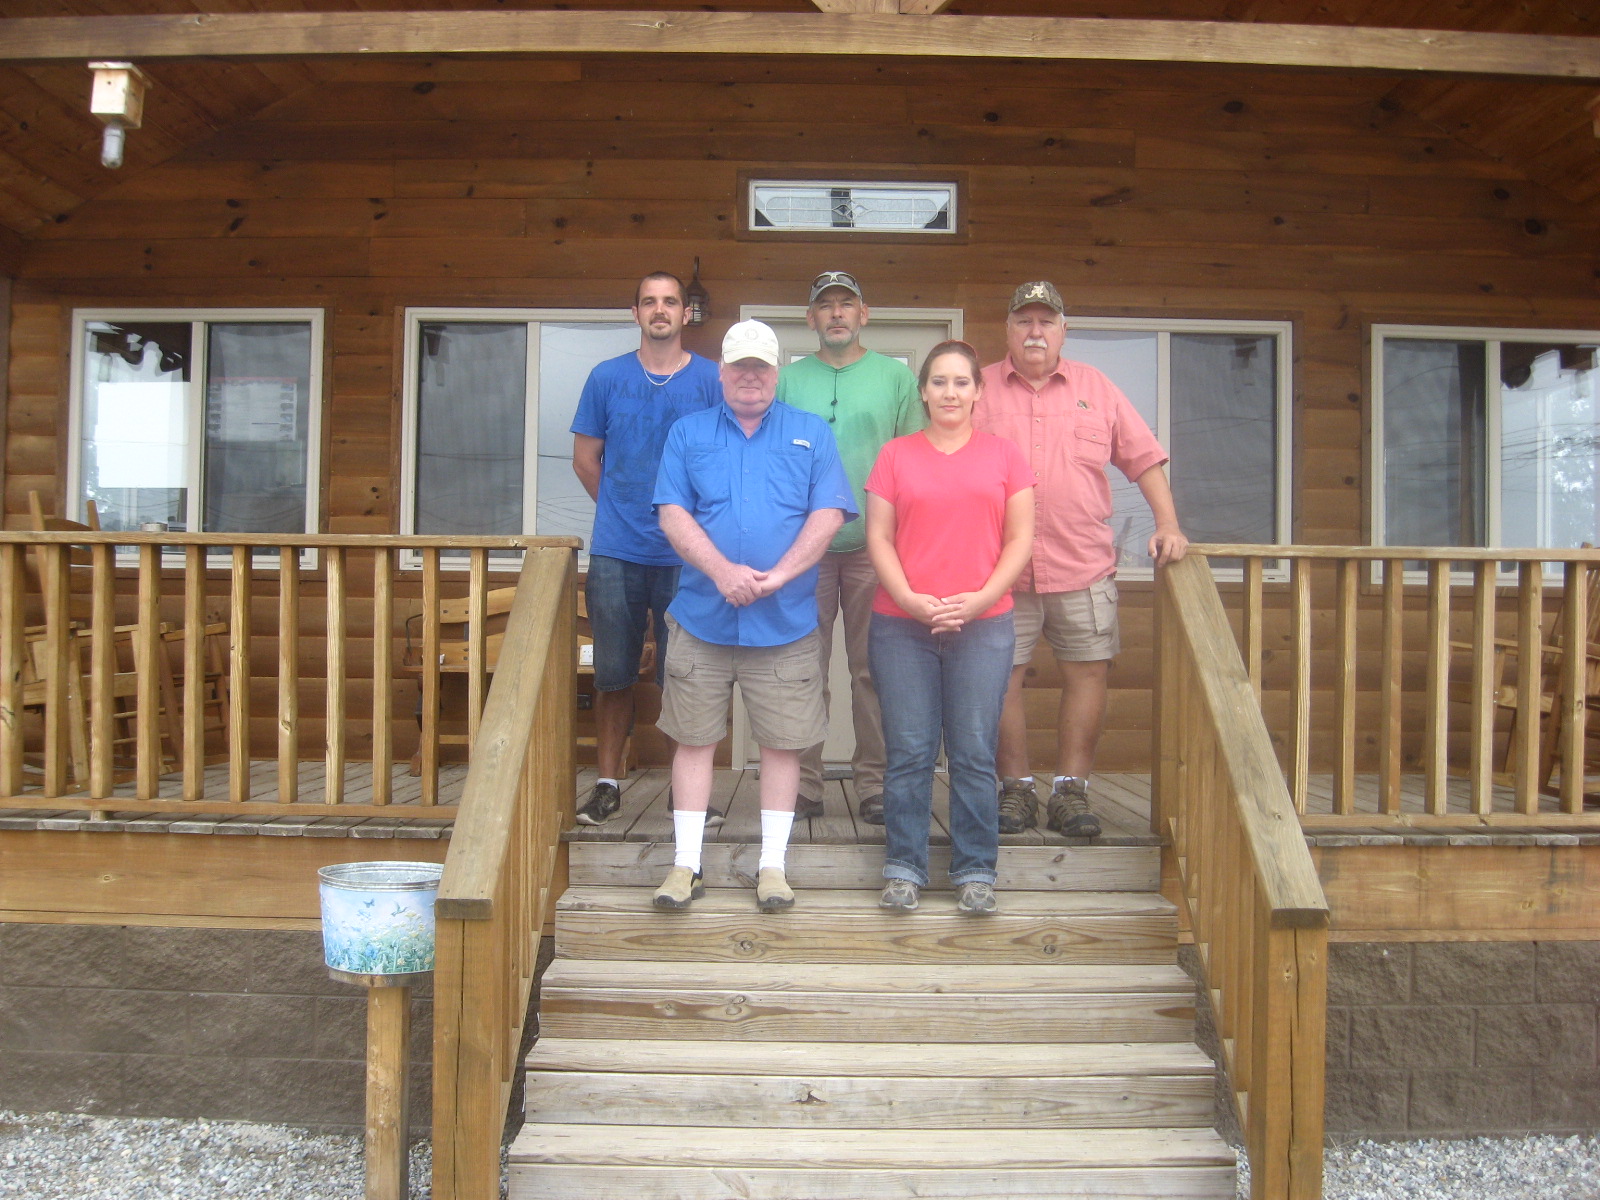 Leisure Isle Buildings - Hwy 231, Wetumpka, AL Lora, Butch and Mike Motley and crew.